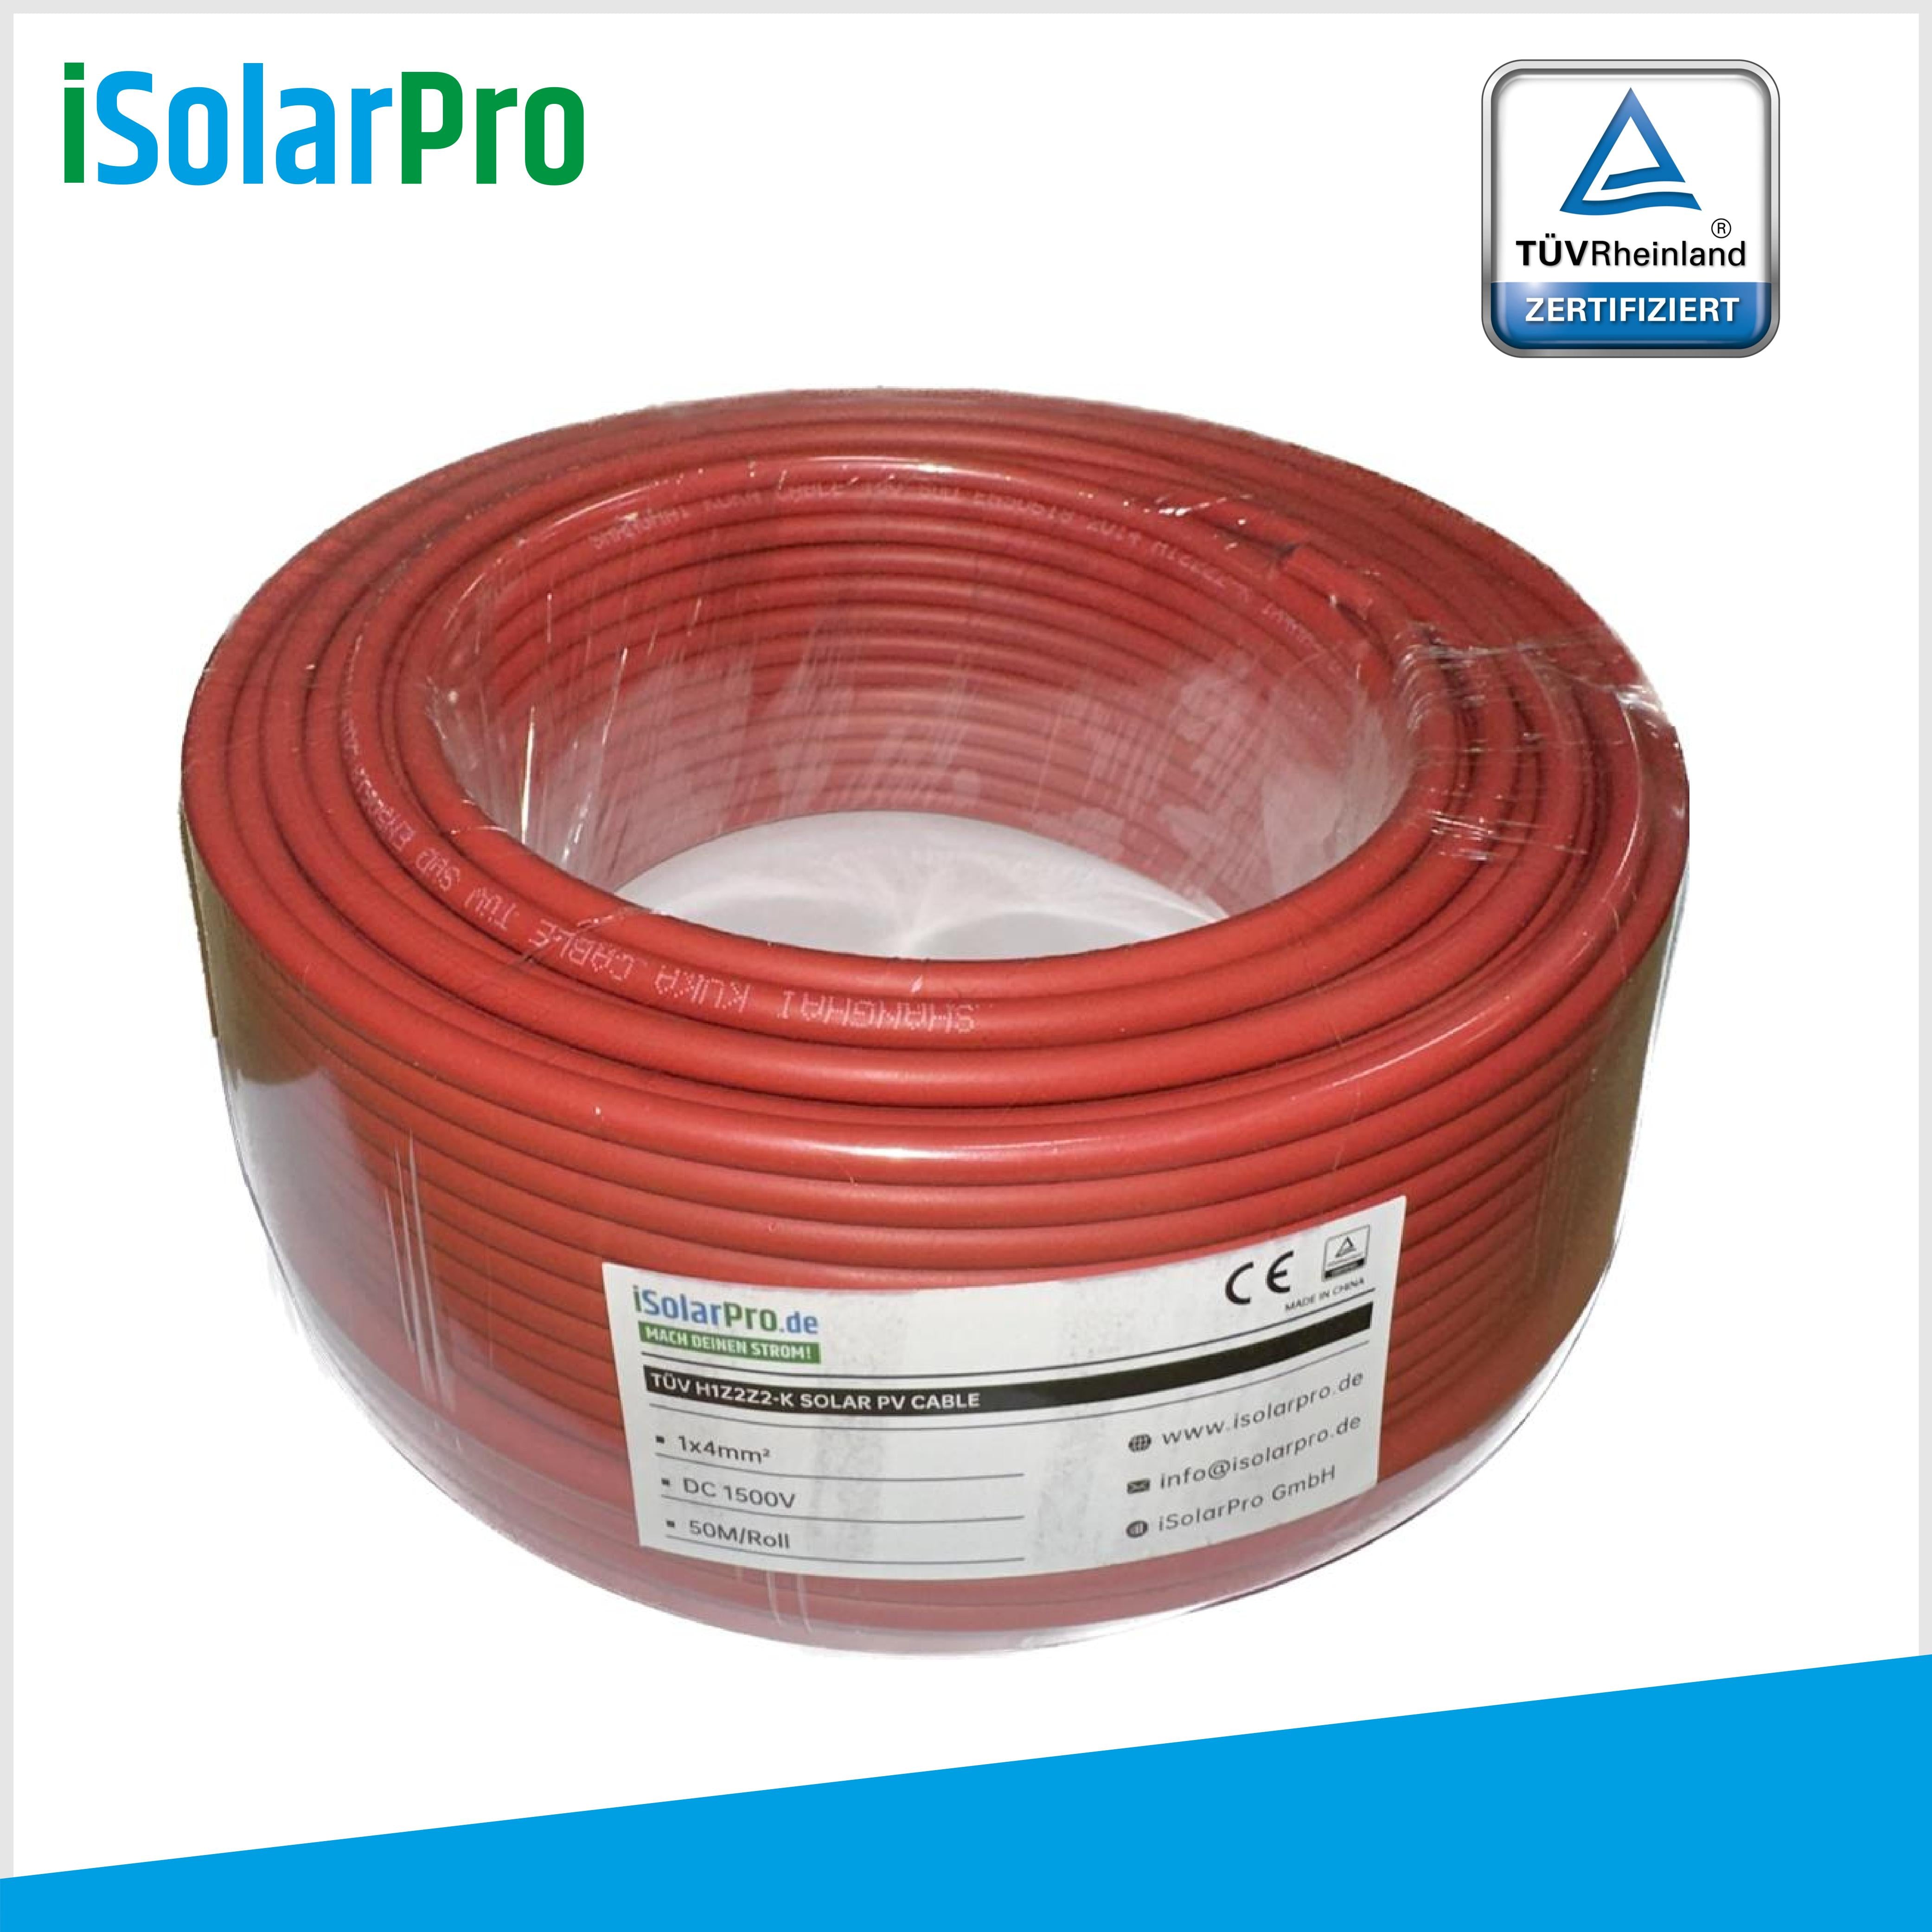 50m solar cable 4 mm² photovoltaic cable for PV systems red 